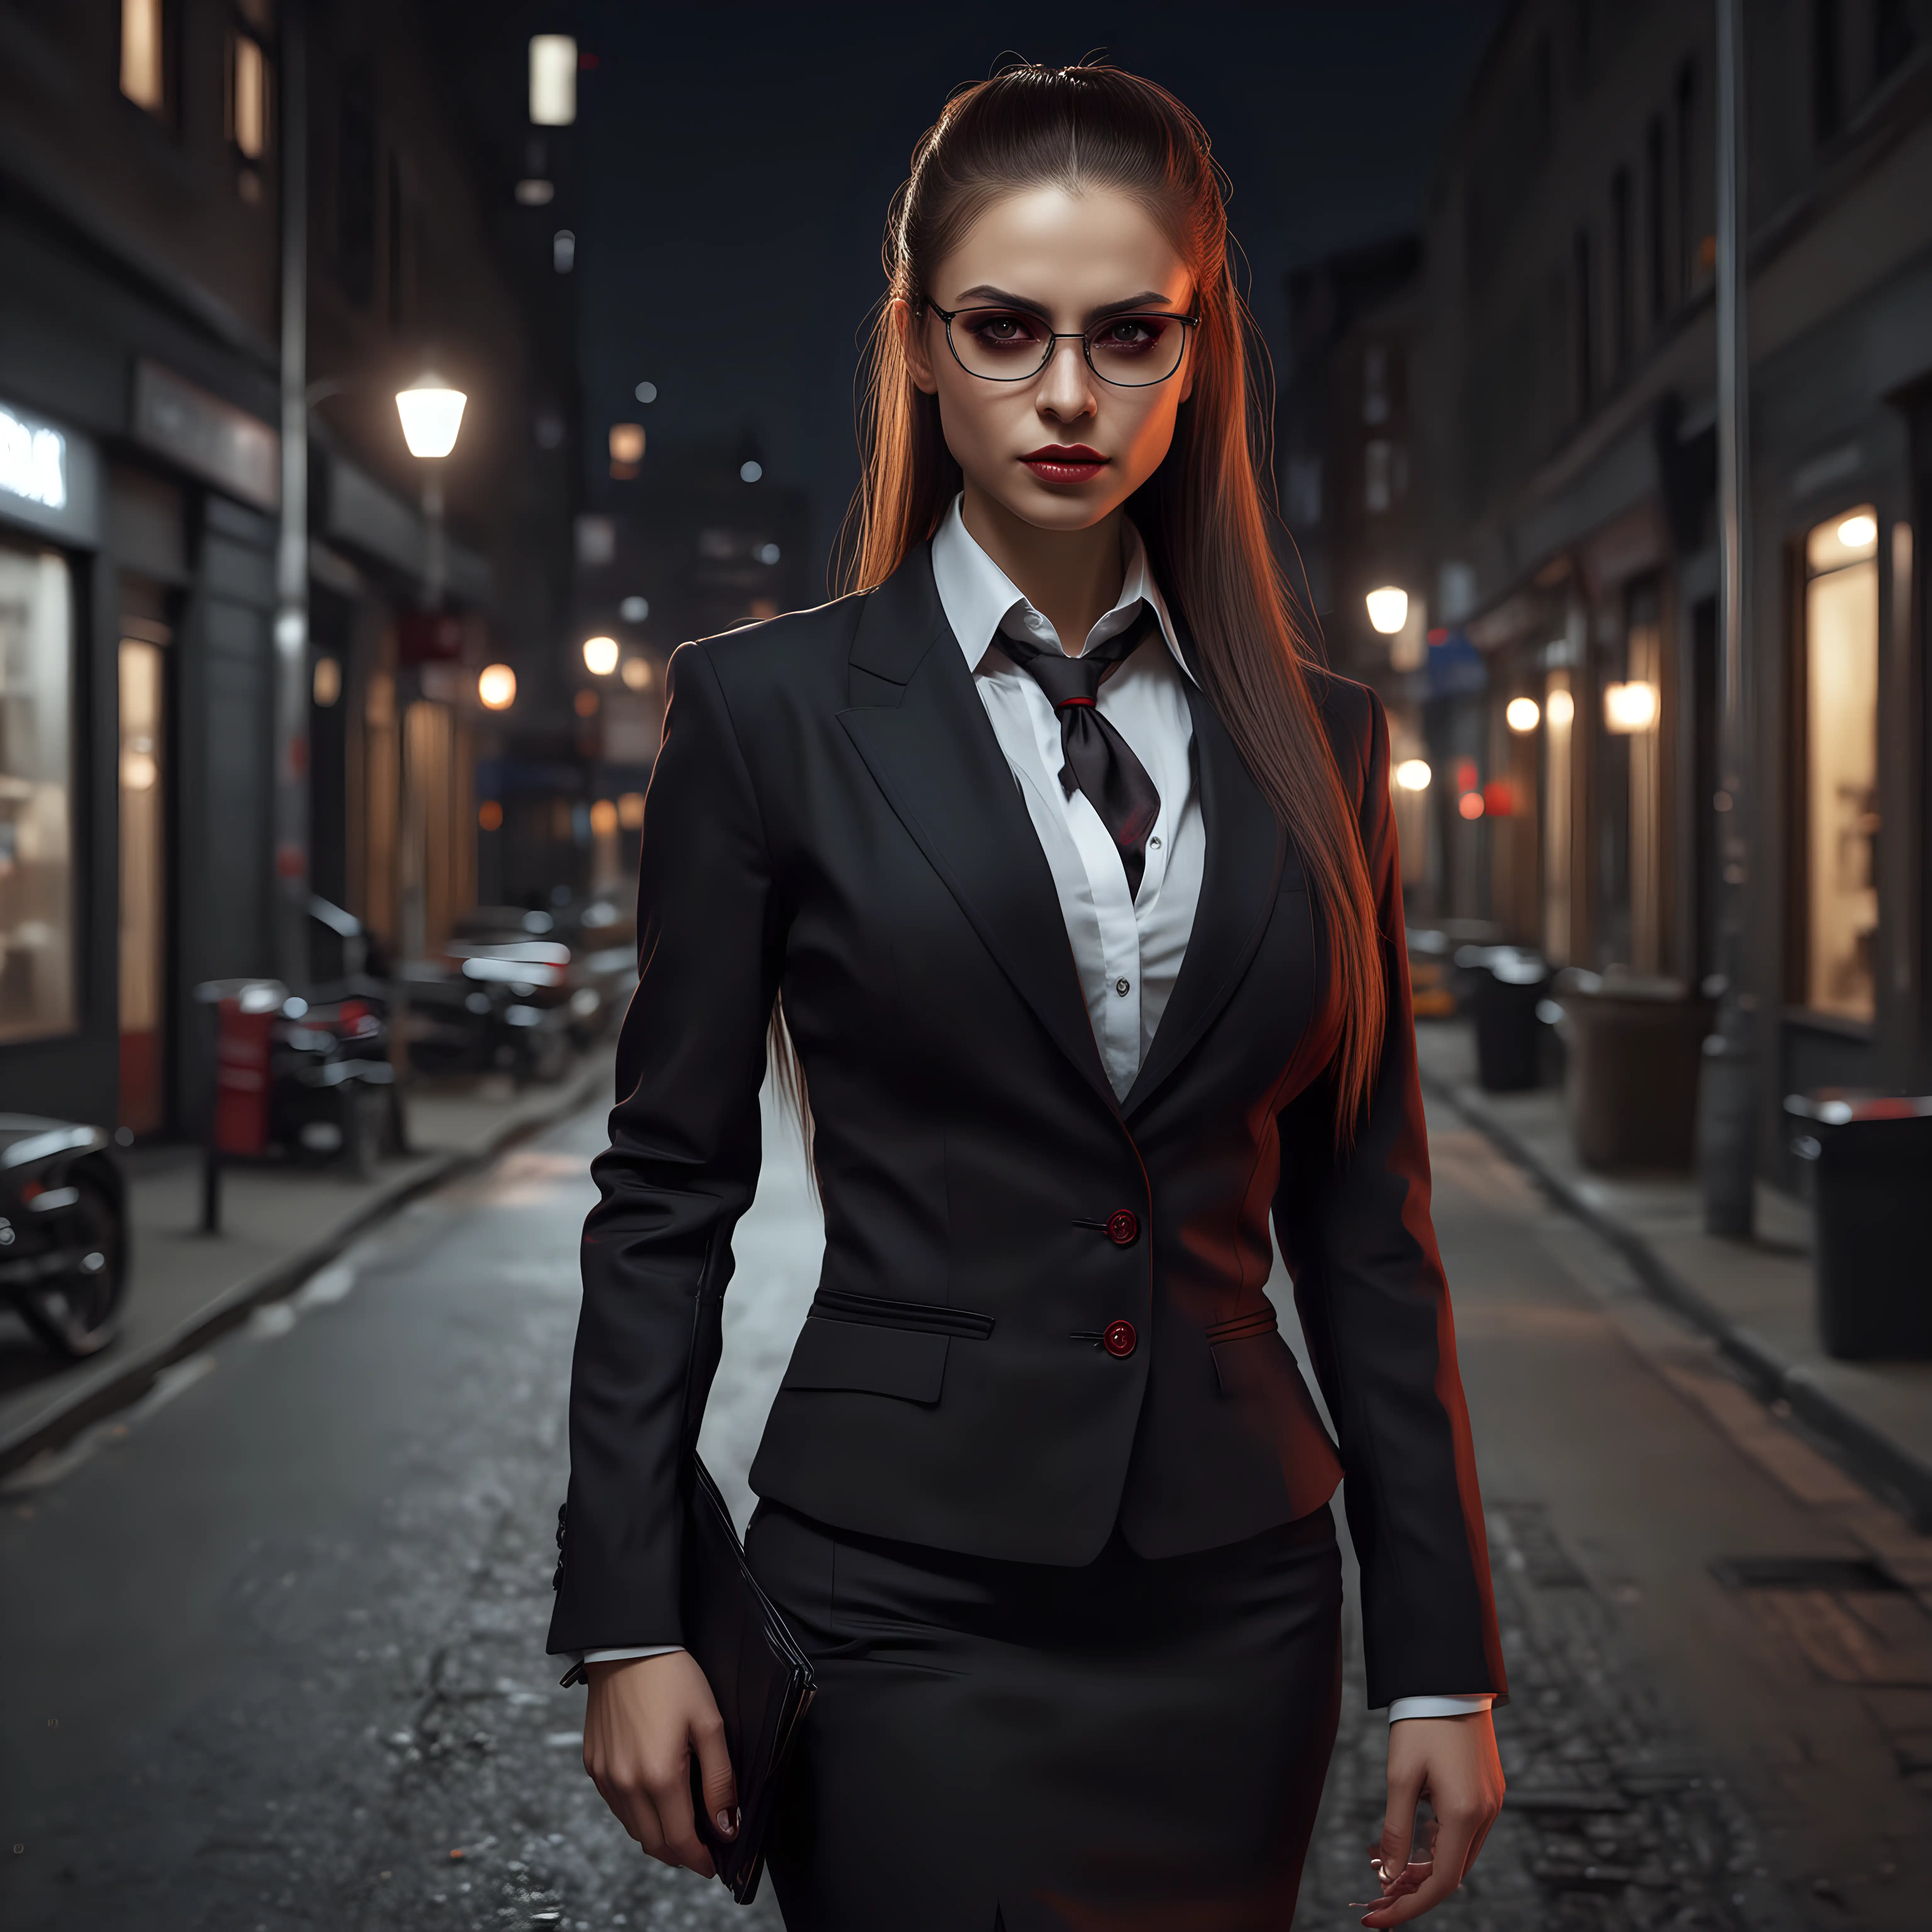 A female Malkavian vampire, long hair, tight ponytail, red glowing eyes, glasses, businesswoman, wearing a suit, long skirt, standing outside on the street at night, realistic